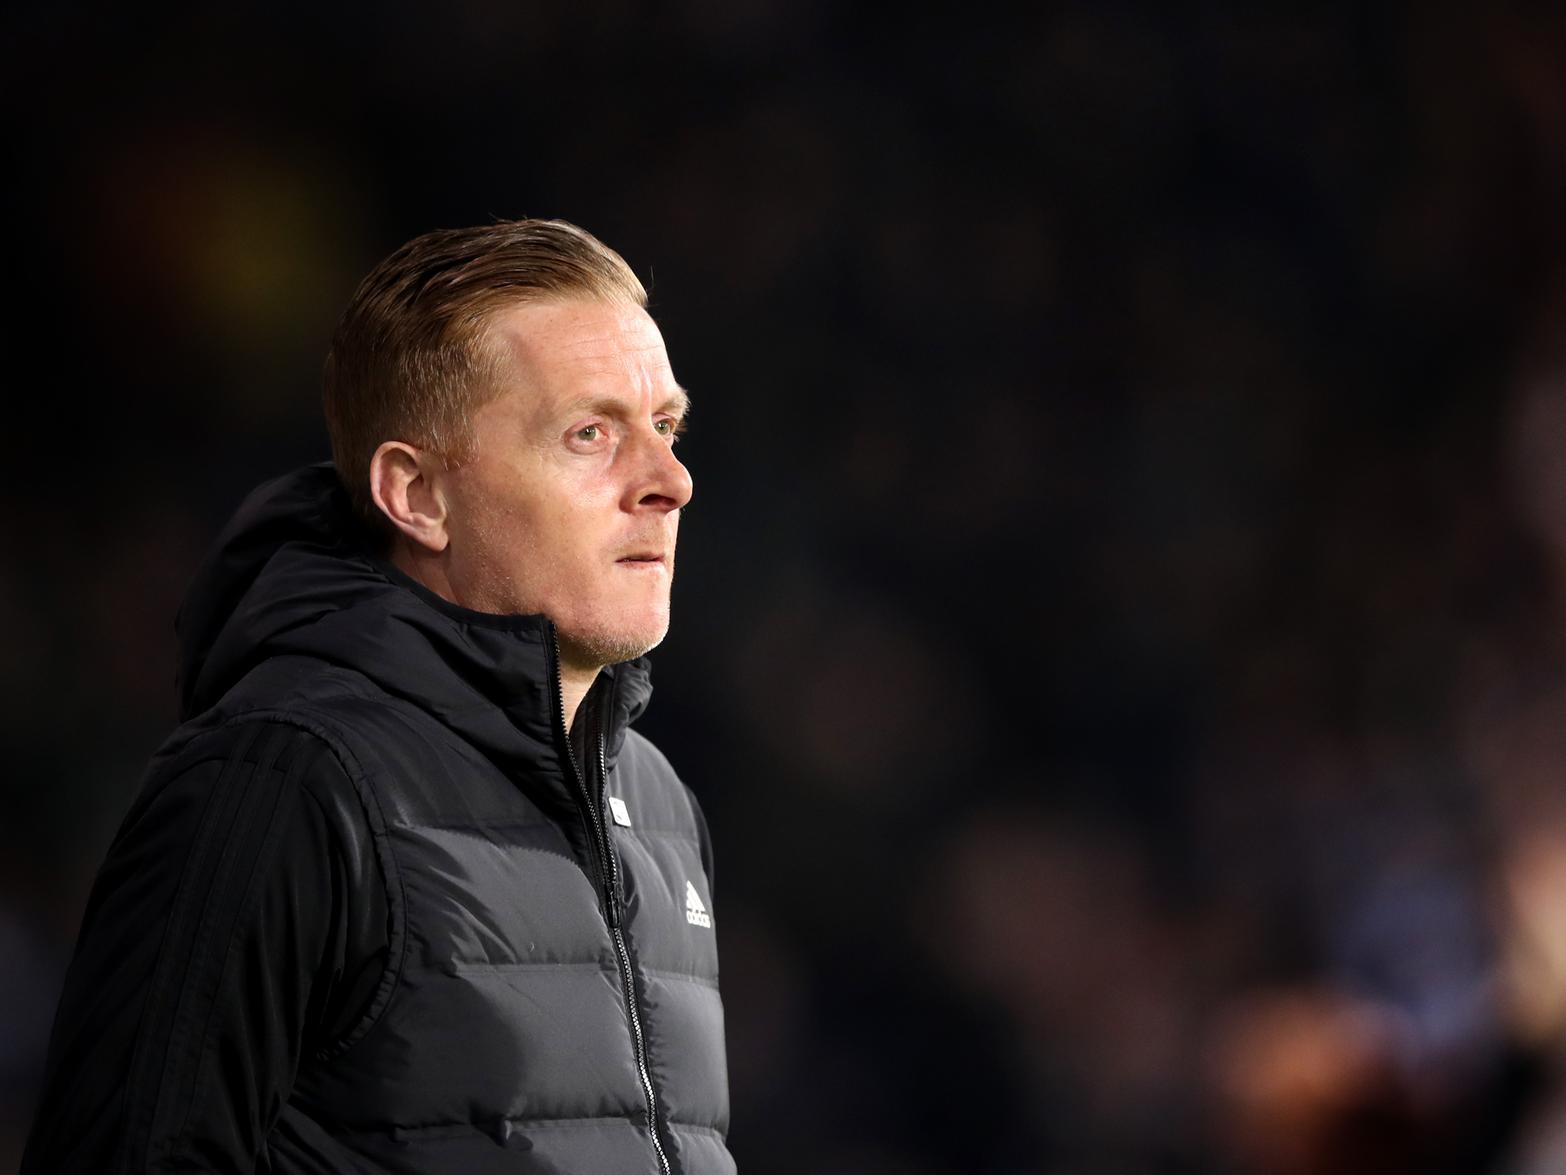 Sheffield Wednesday managerGarry Monk has revealed that he's eager for his defence to improve structurally, as they look to respond from disappointing pre-international break results. (Sheffield Star)